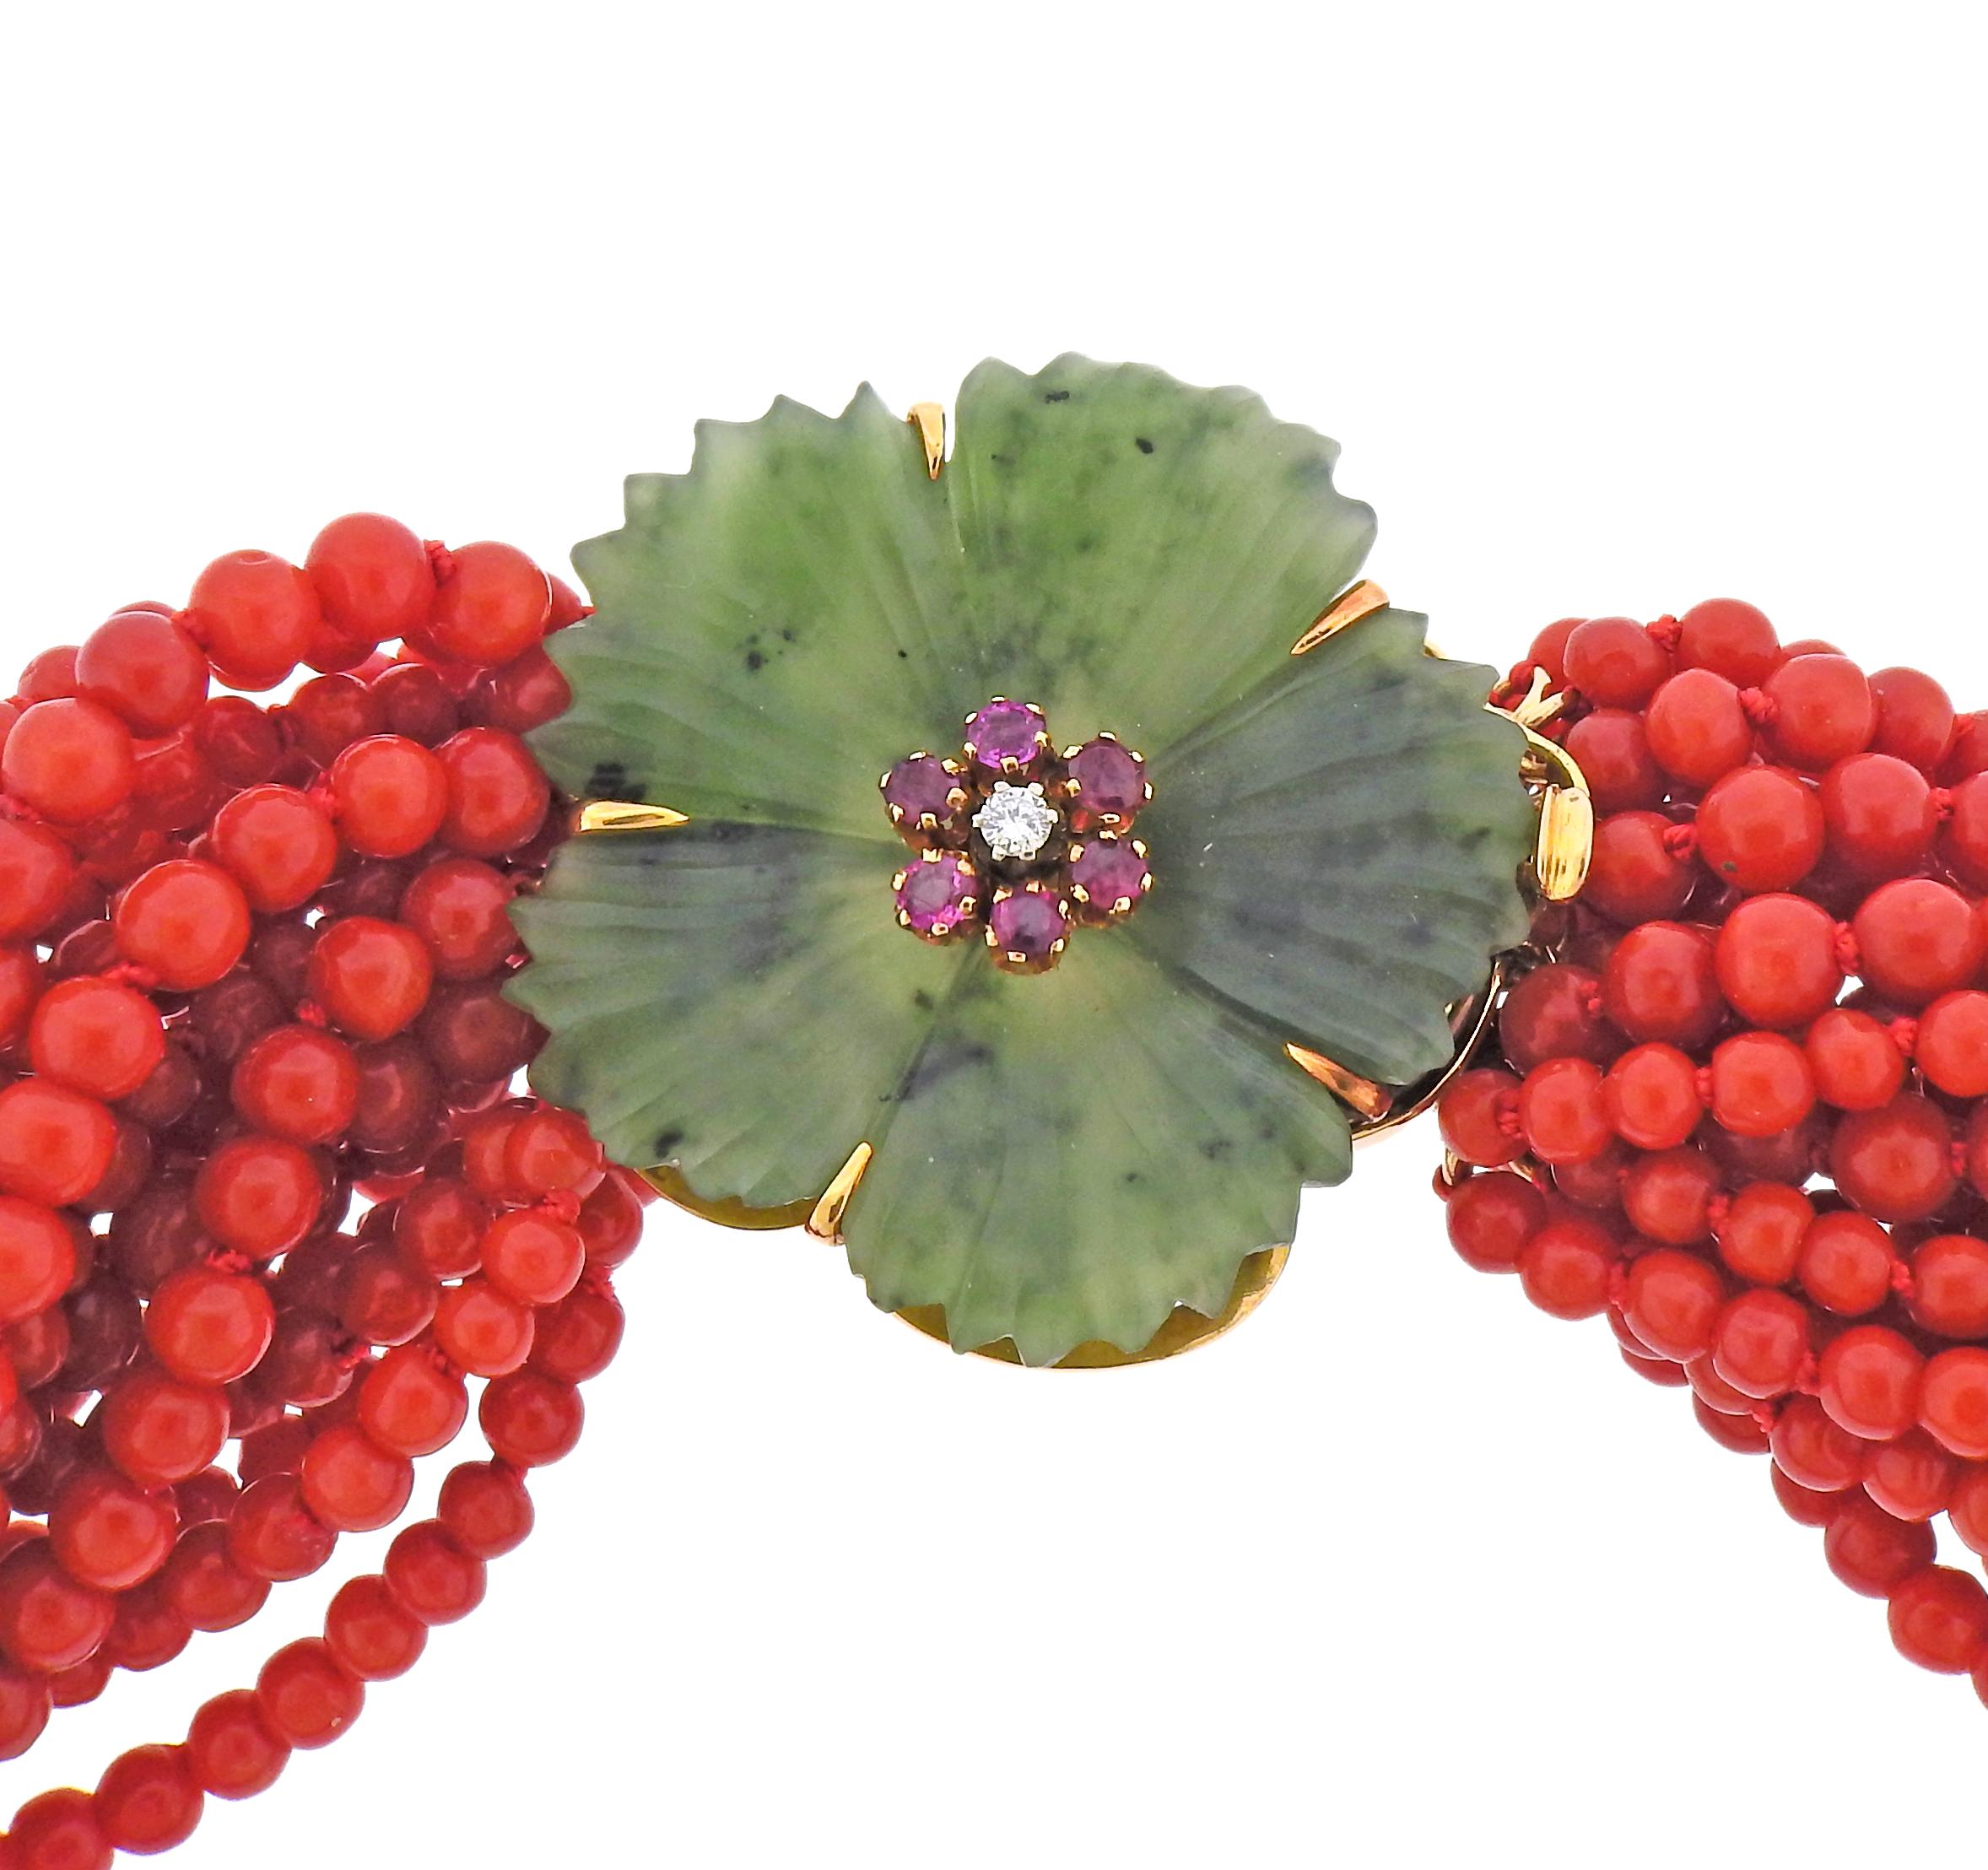 Mid century 18k gold flower clasp torsade necklace, featuring carved nephrite flower, with rubies and approx. 0.05ct diamond, and coral beads 3.3 - 4.5mm. Necklace is 15.5